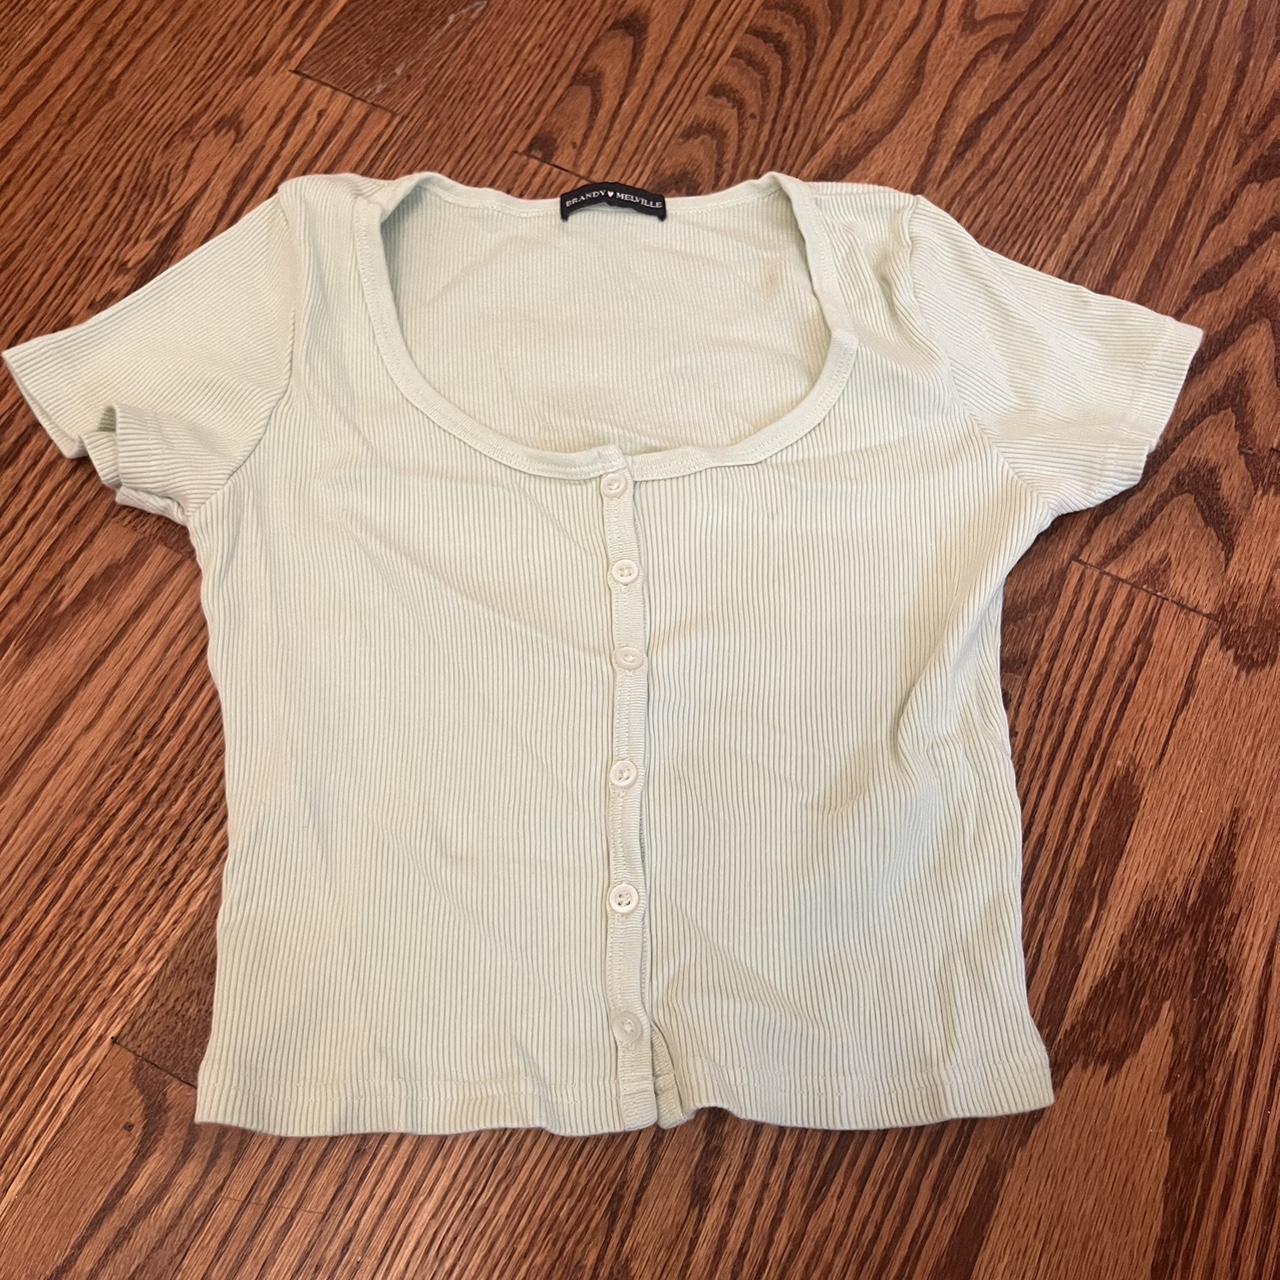 Brandy melville white zelly top ☆ PLEASE CHECK OUT - Depop